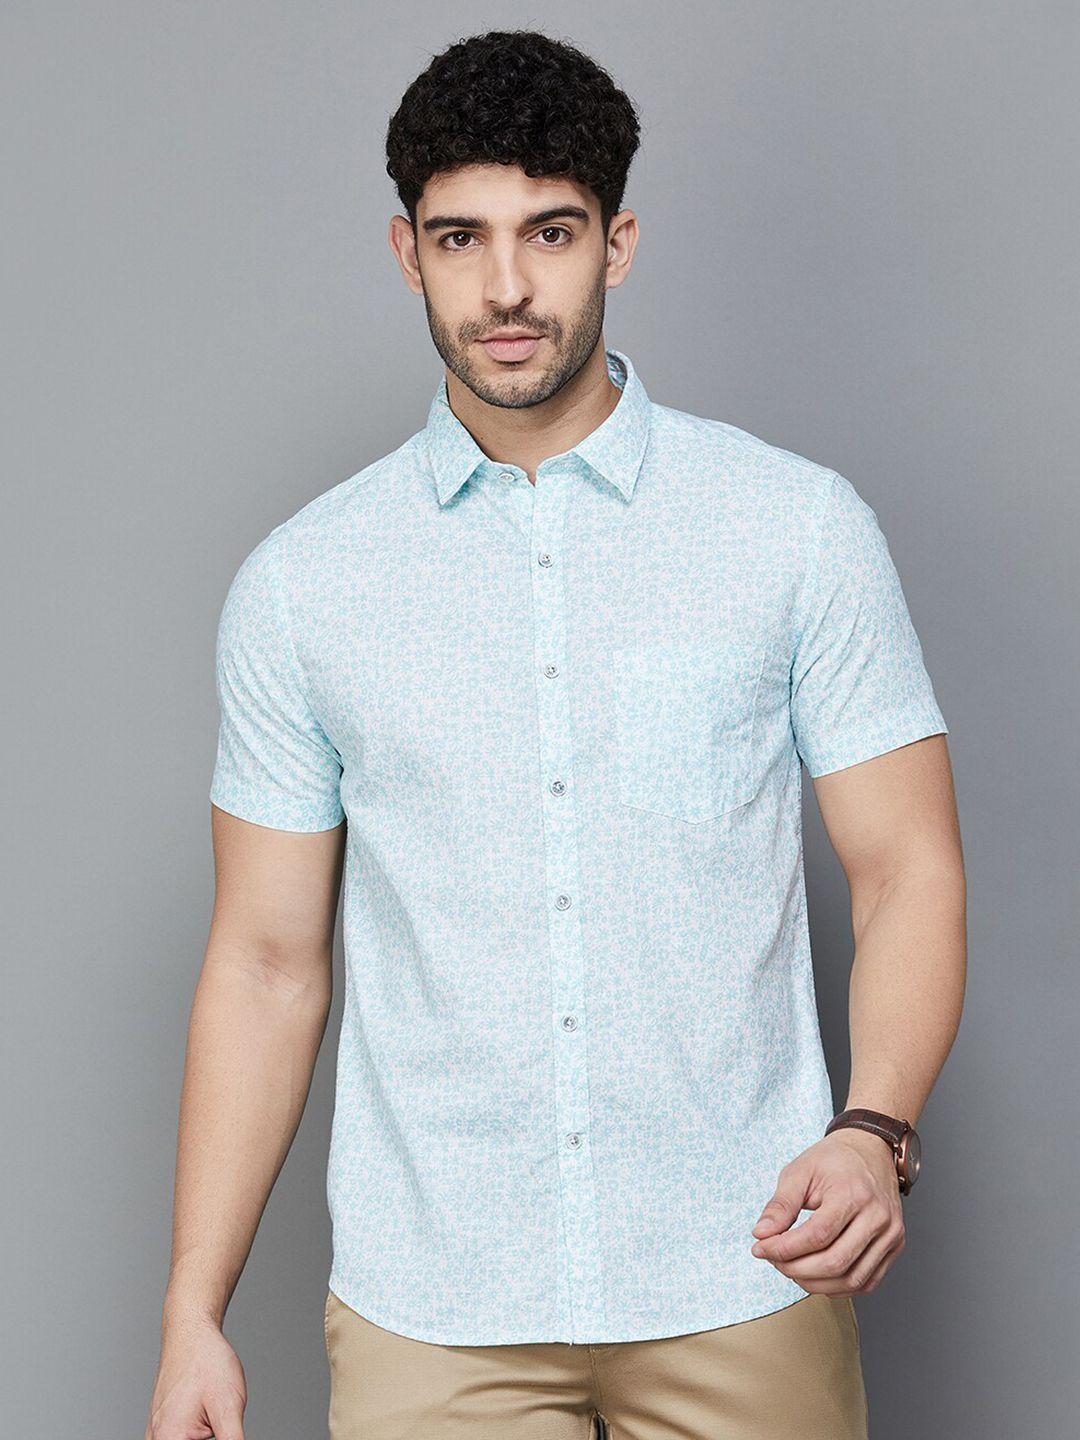 code by lifestyle floral printed slim fit cotton shirt